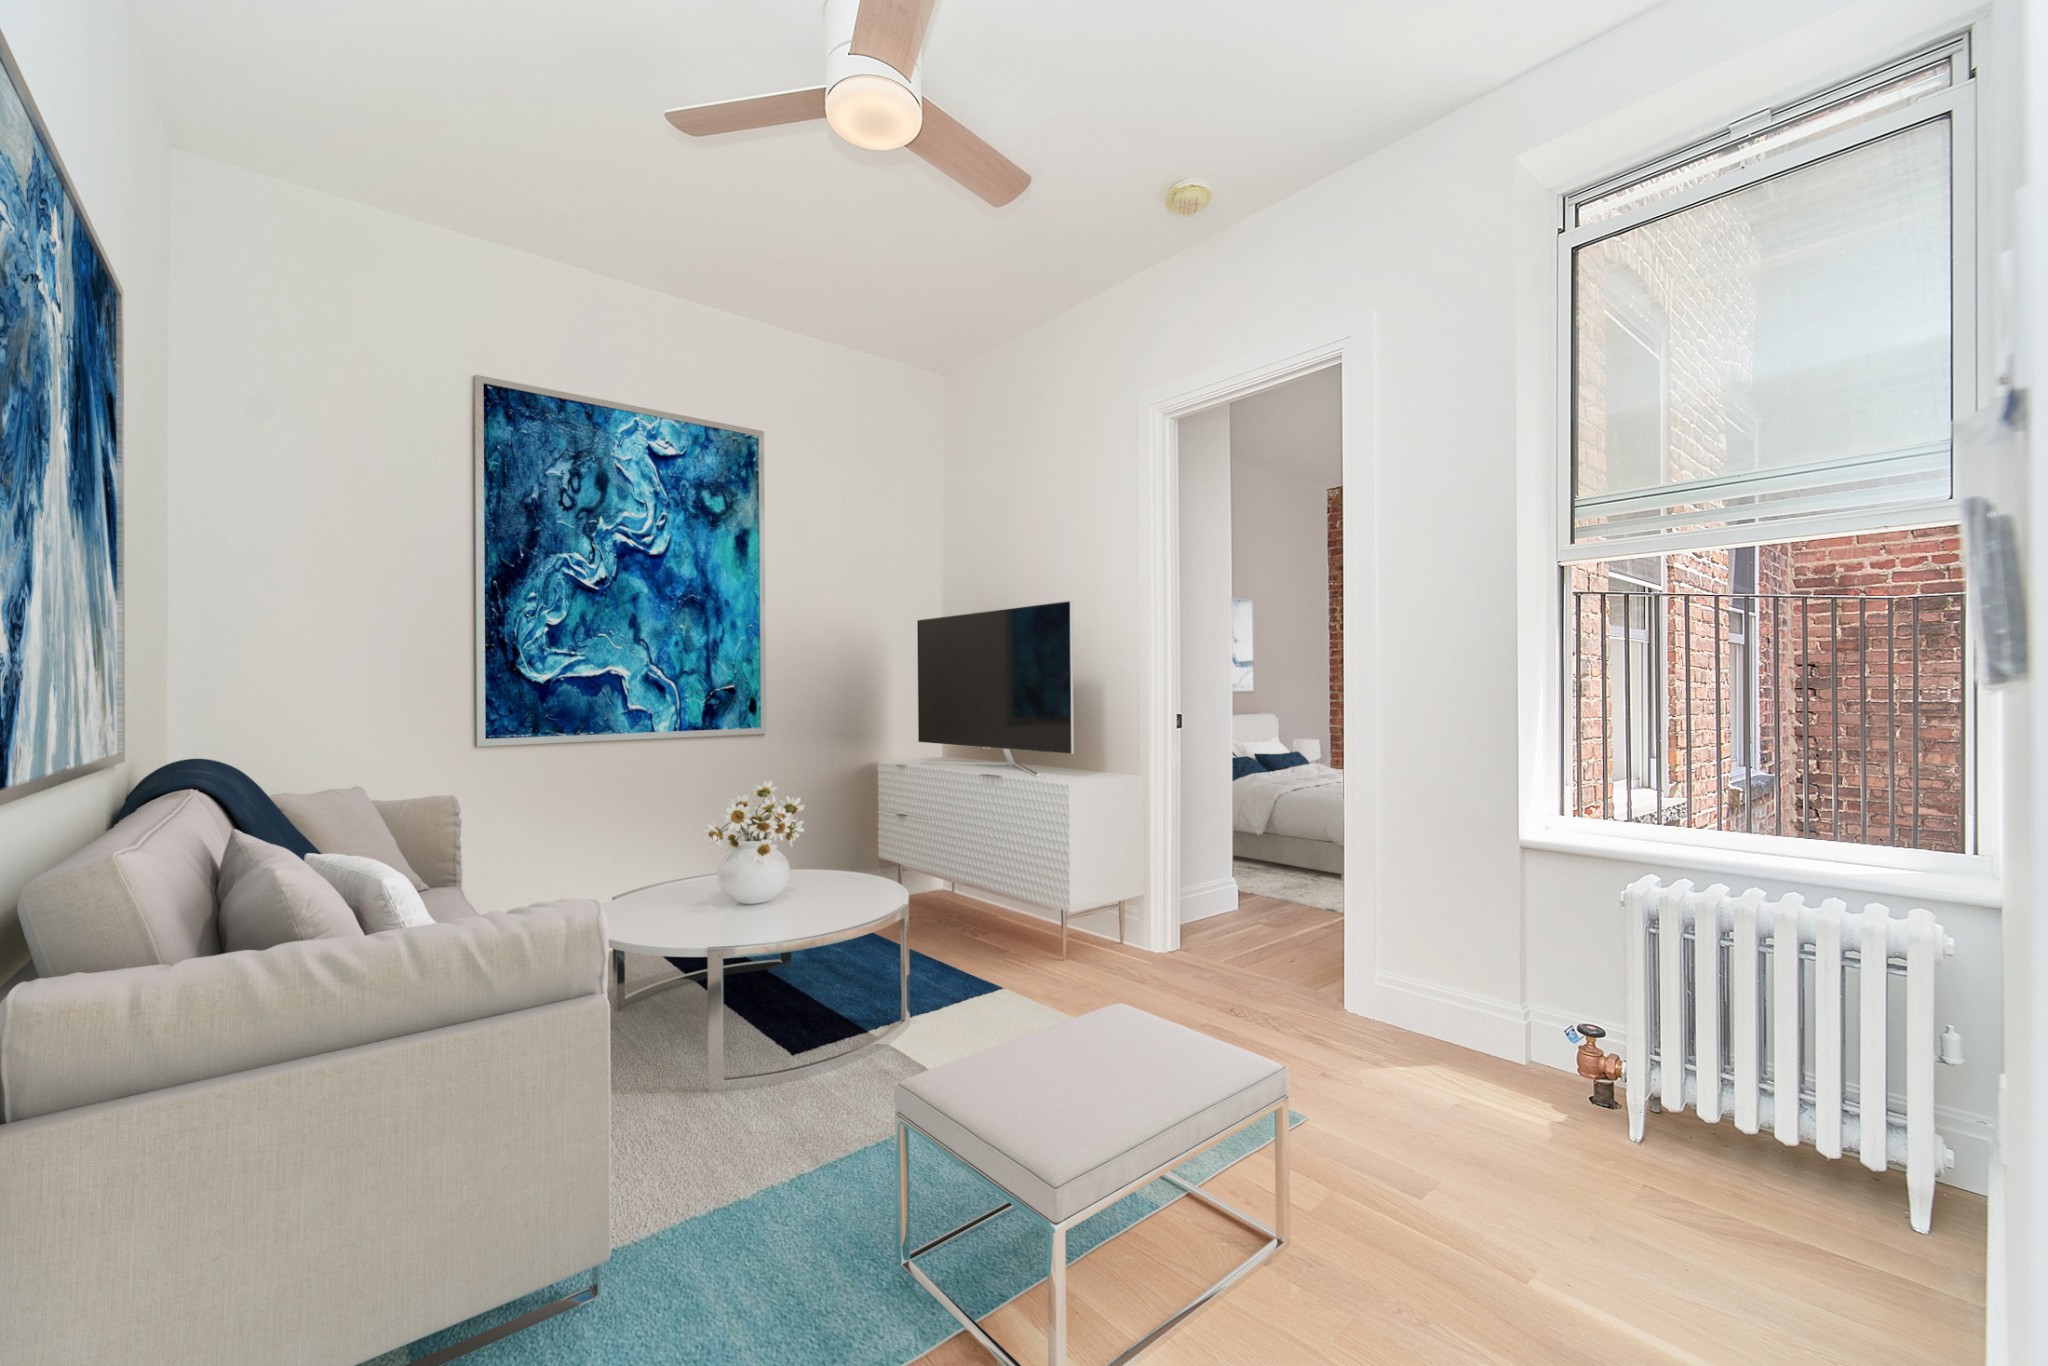 309 East 5th Street 21, East Village, Downtown, NYC - 1 Bedrooms  
1 Bathrooms  
3 Rooms - 